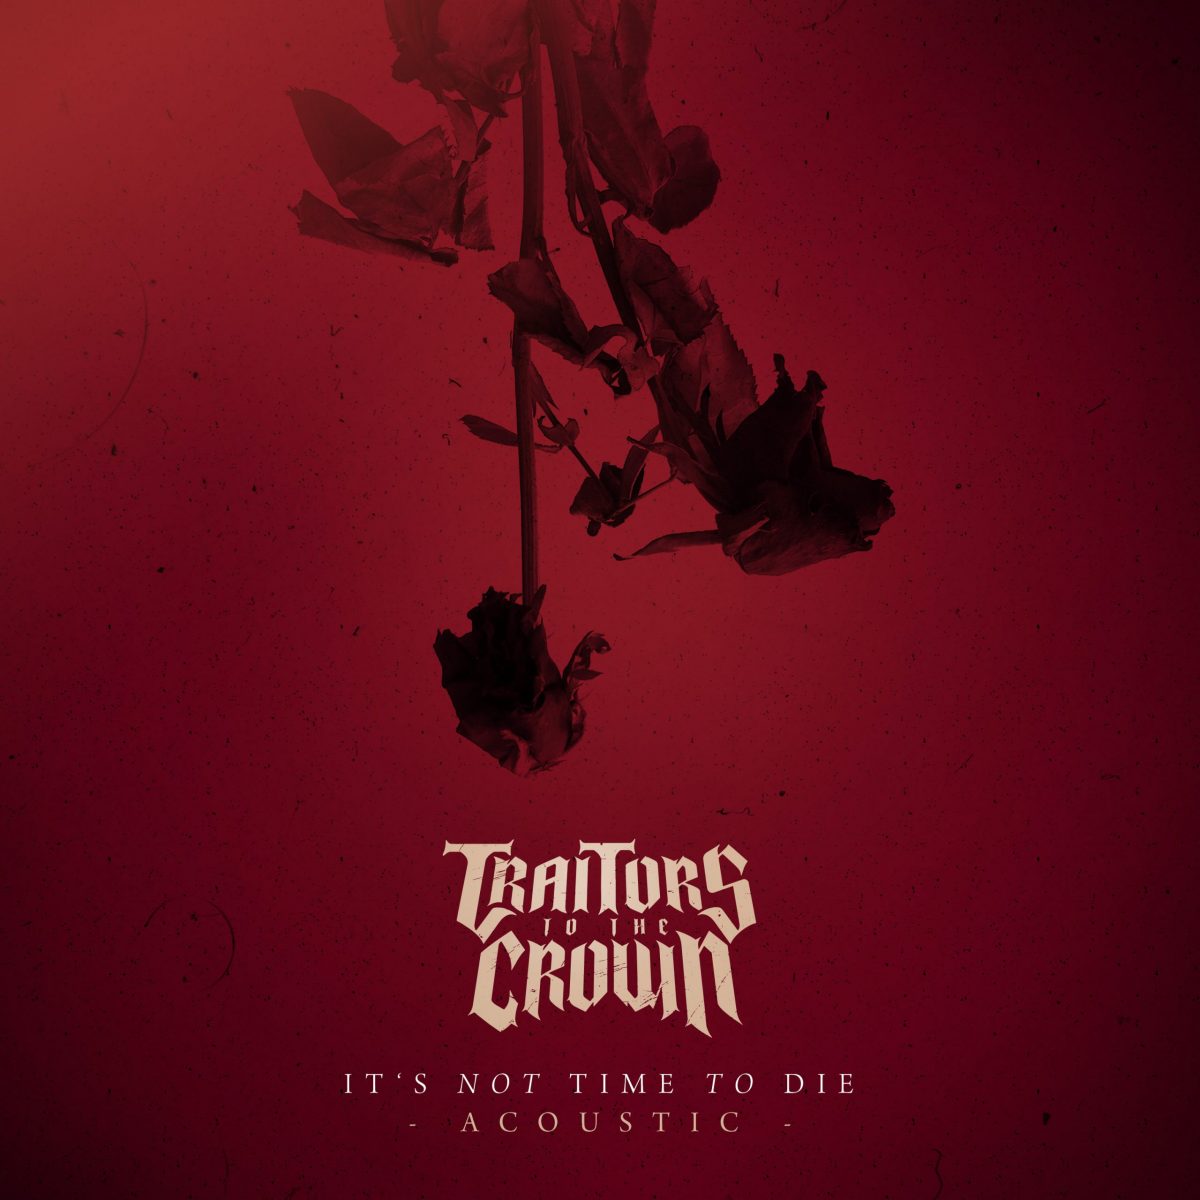 traitors-to-the-crown-veroeffentlichen-its-not-time-to-die-acoustic-news